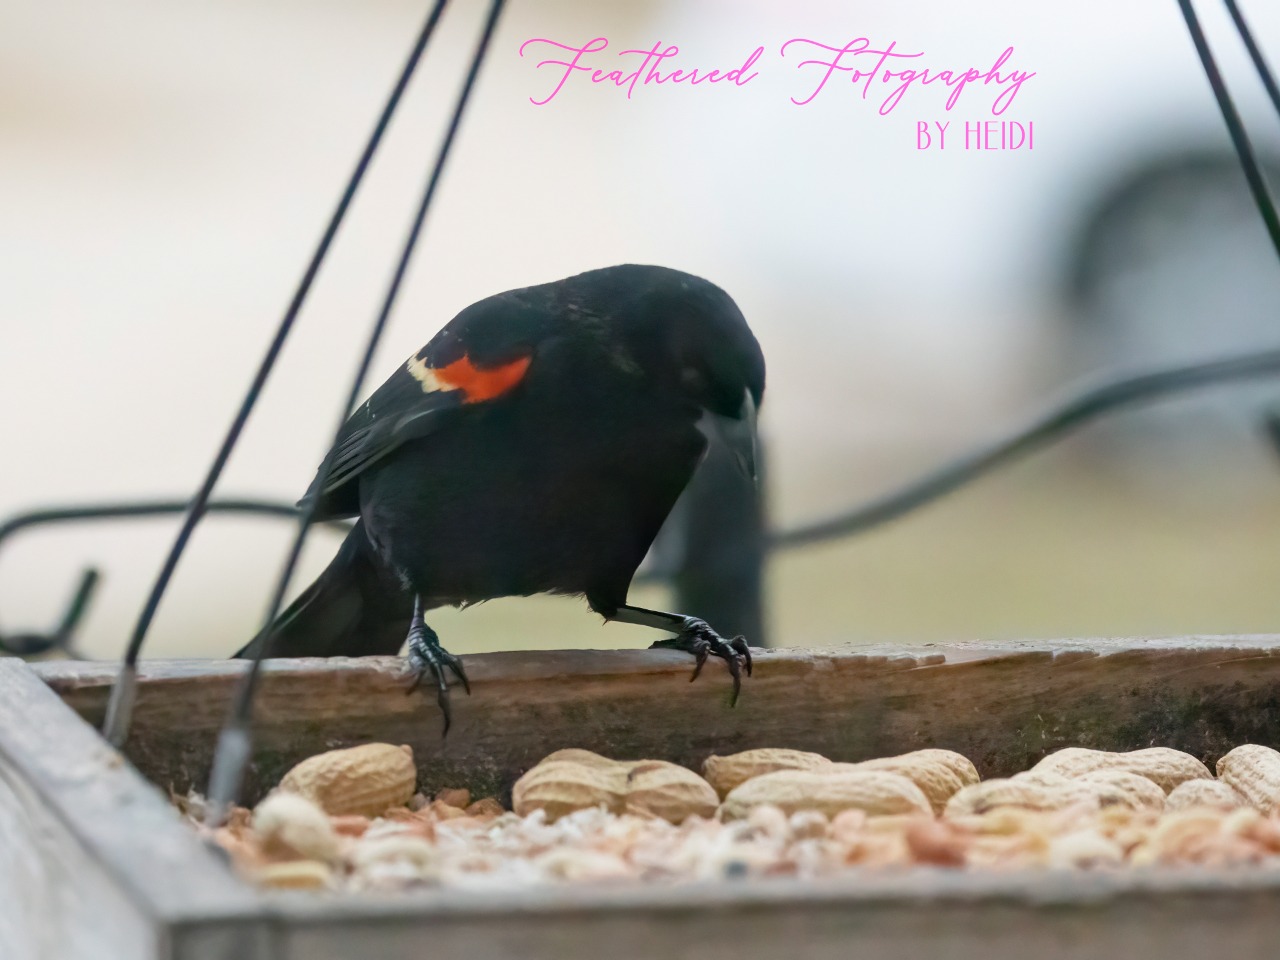 Red-winged Blackbird perched at feeder